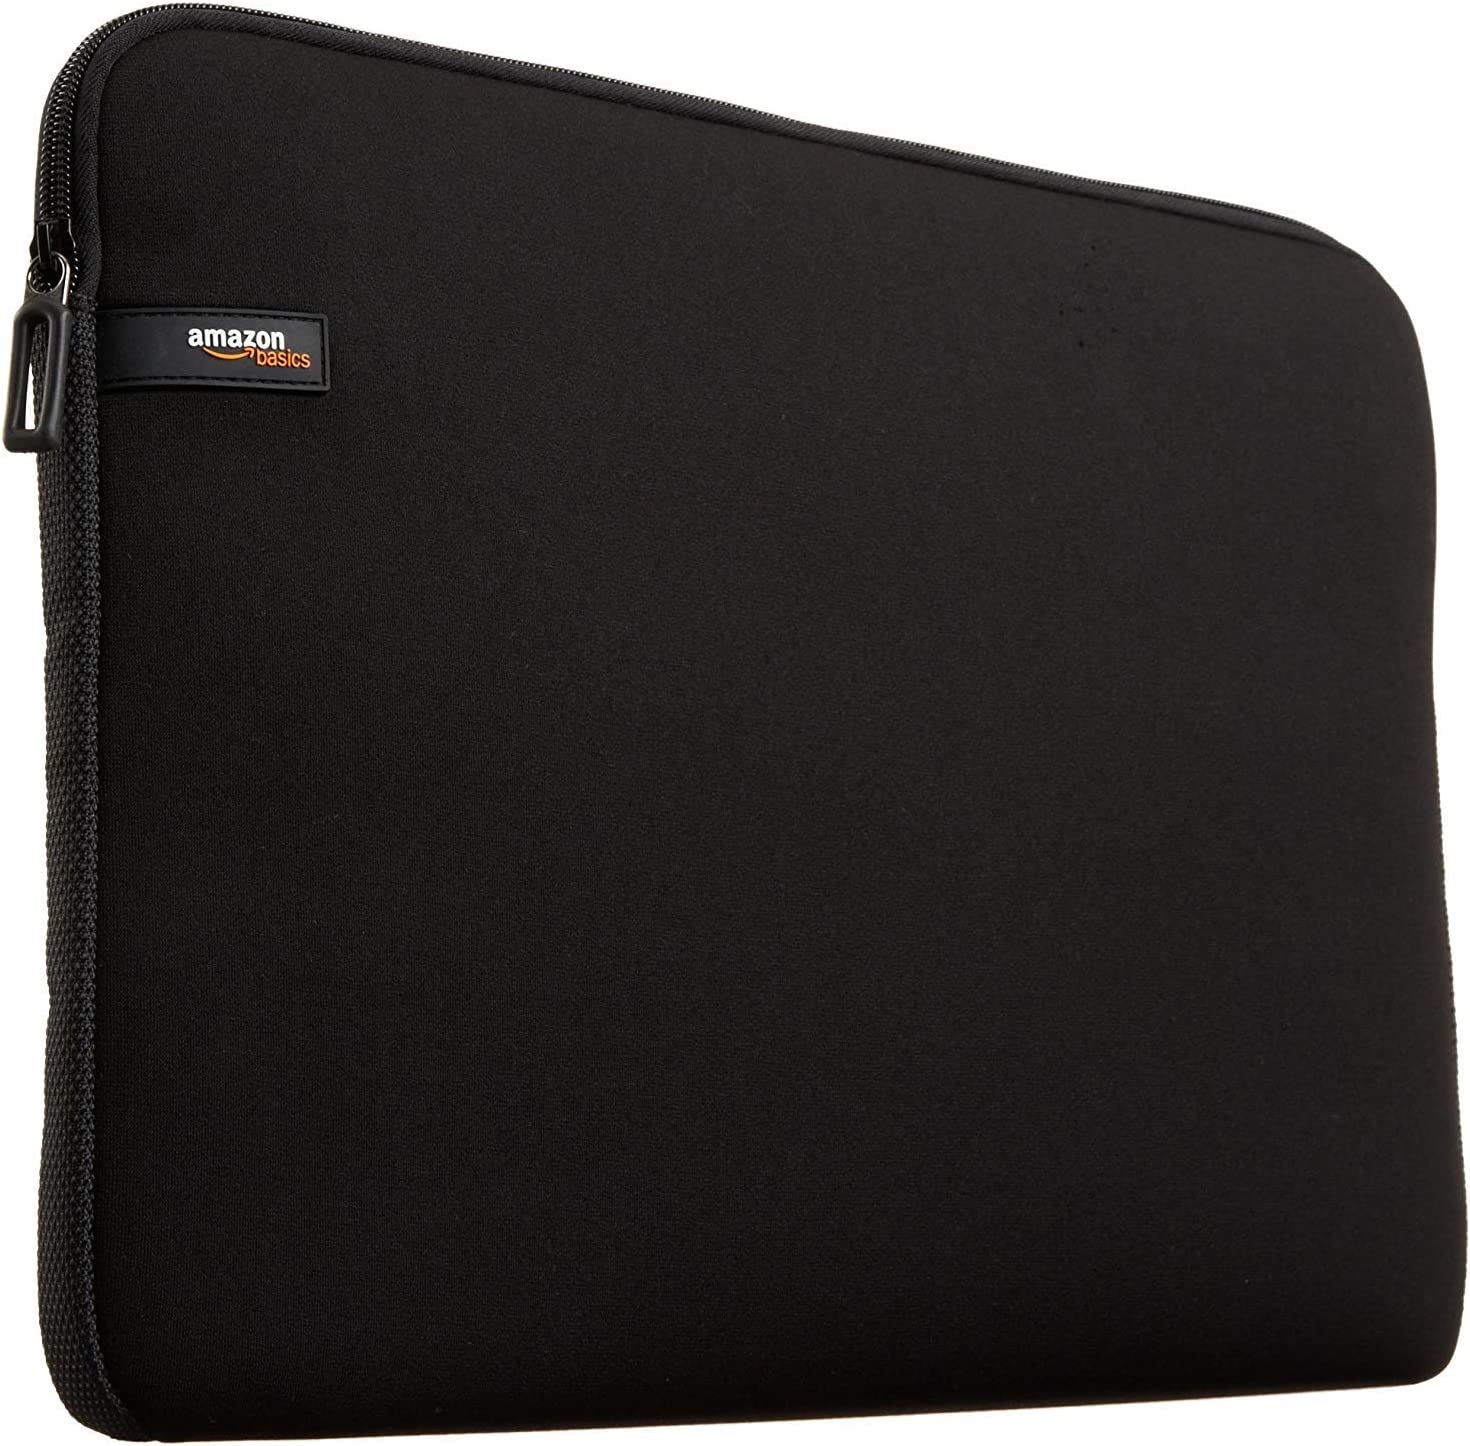 Amazon Basics 13.3-Inch $5.64 & 15.6-inch $5.50 Laptop Sleeve, Protective Case with Zipper - Black FS Prime